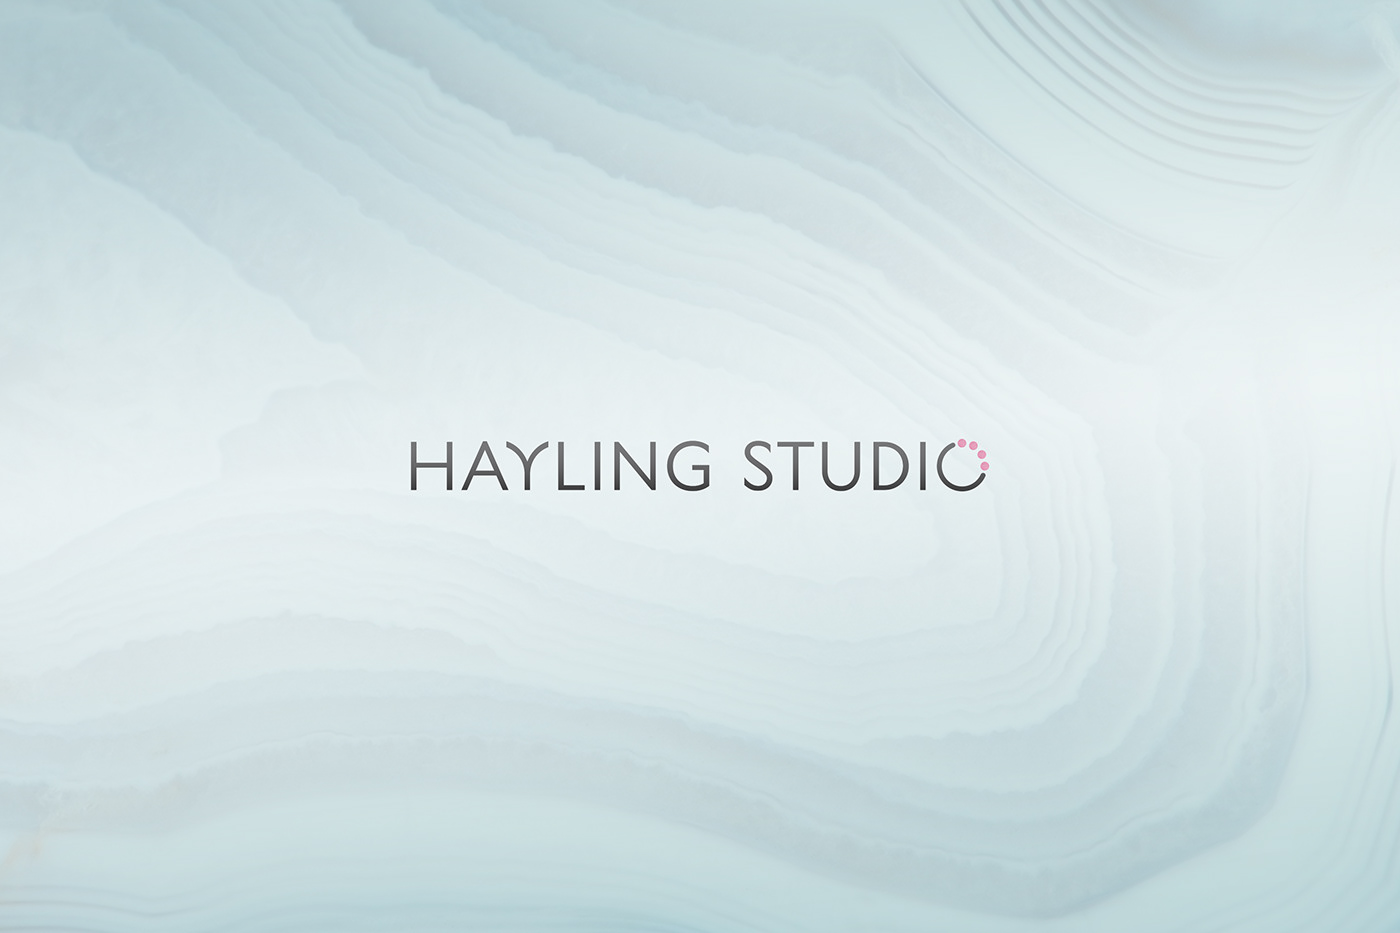 Hayling Studio logo for a local jewelry store.